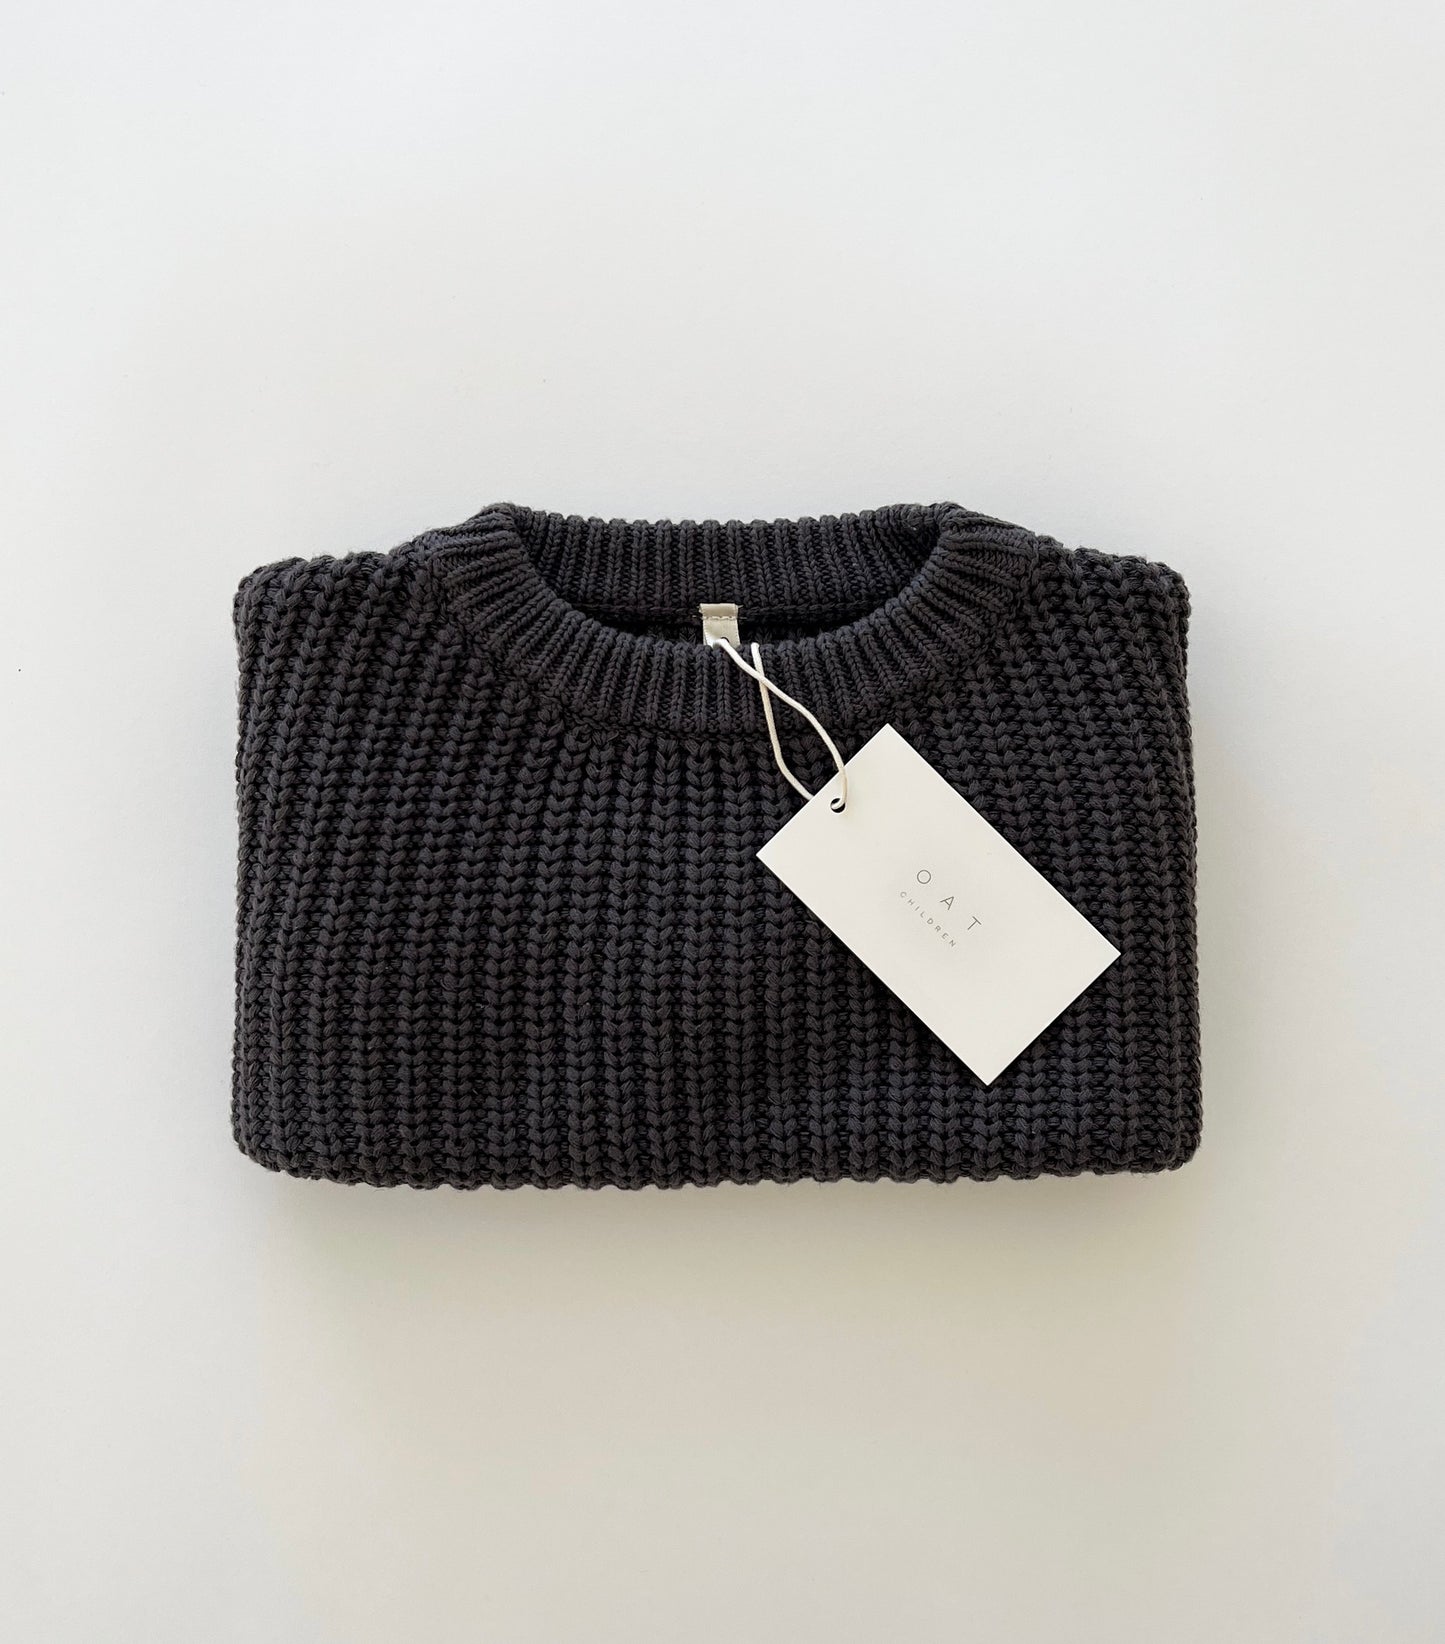 ‘Charcoal’ Chunky Knit Sweater